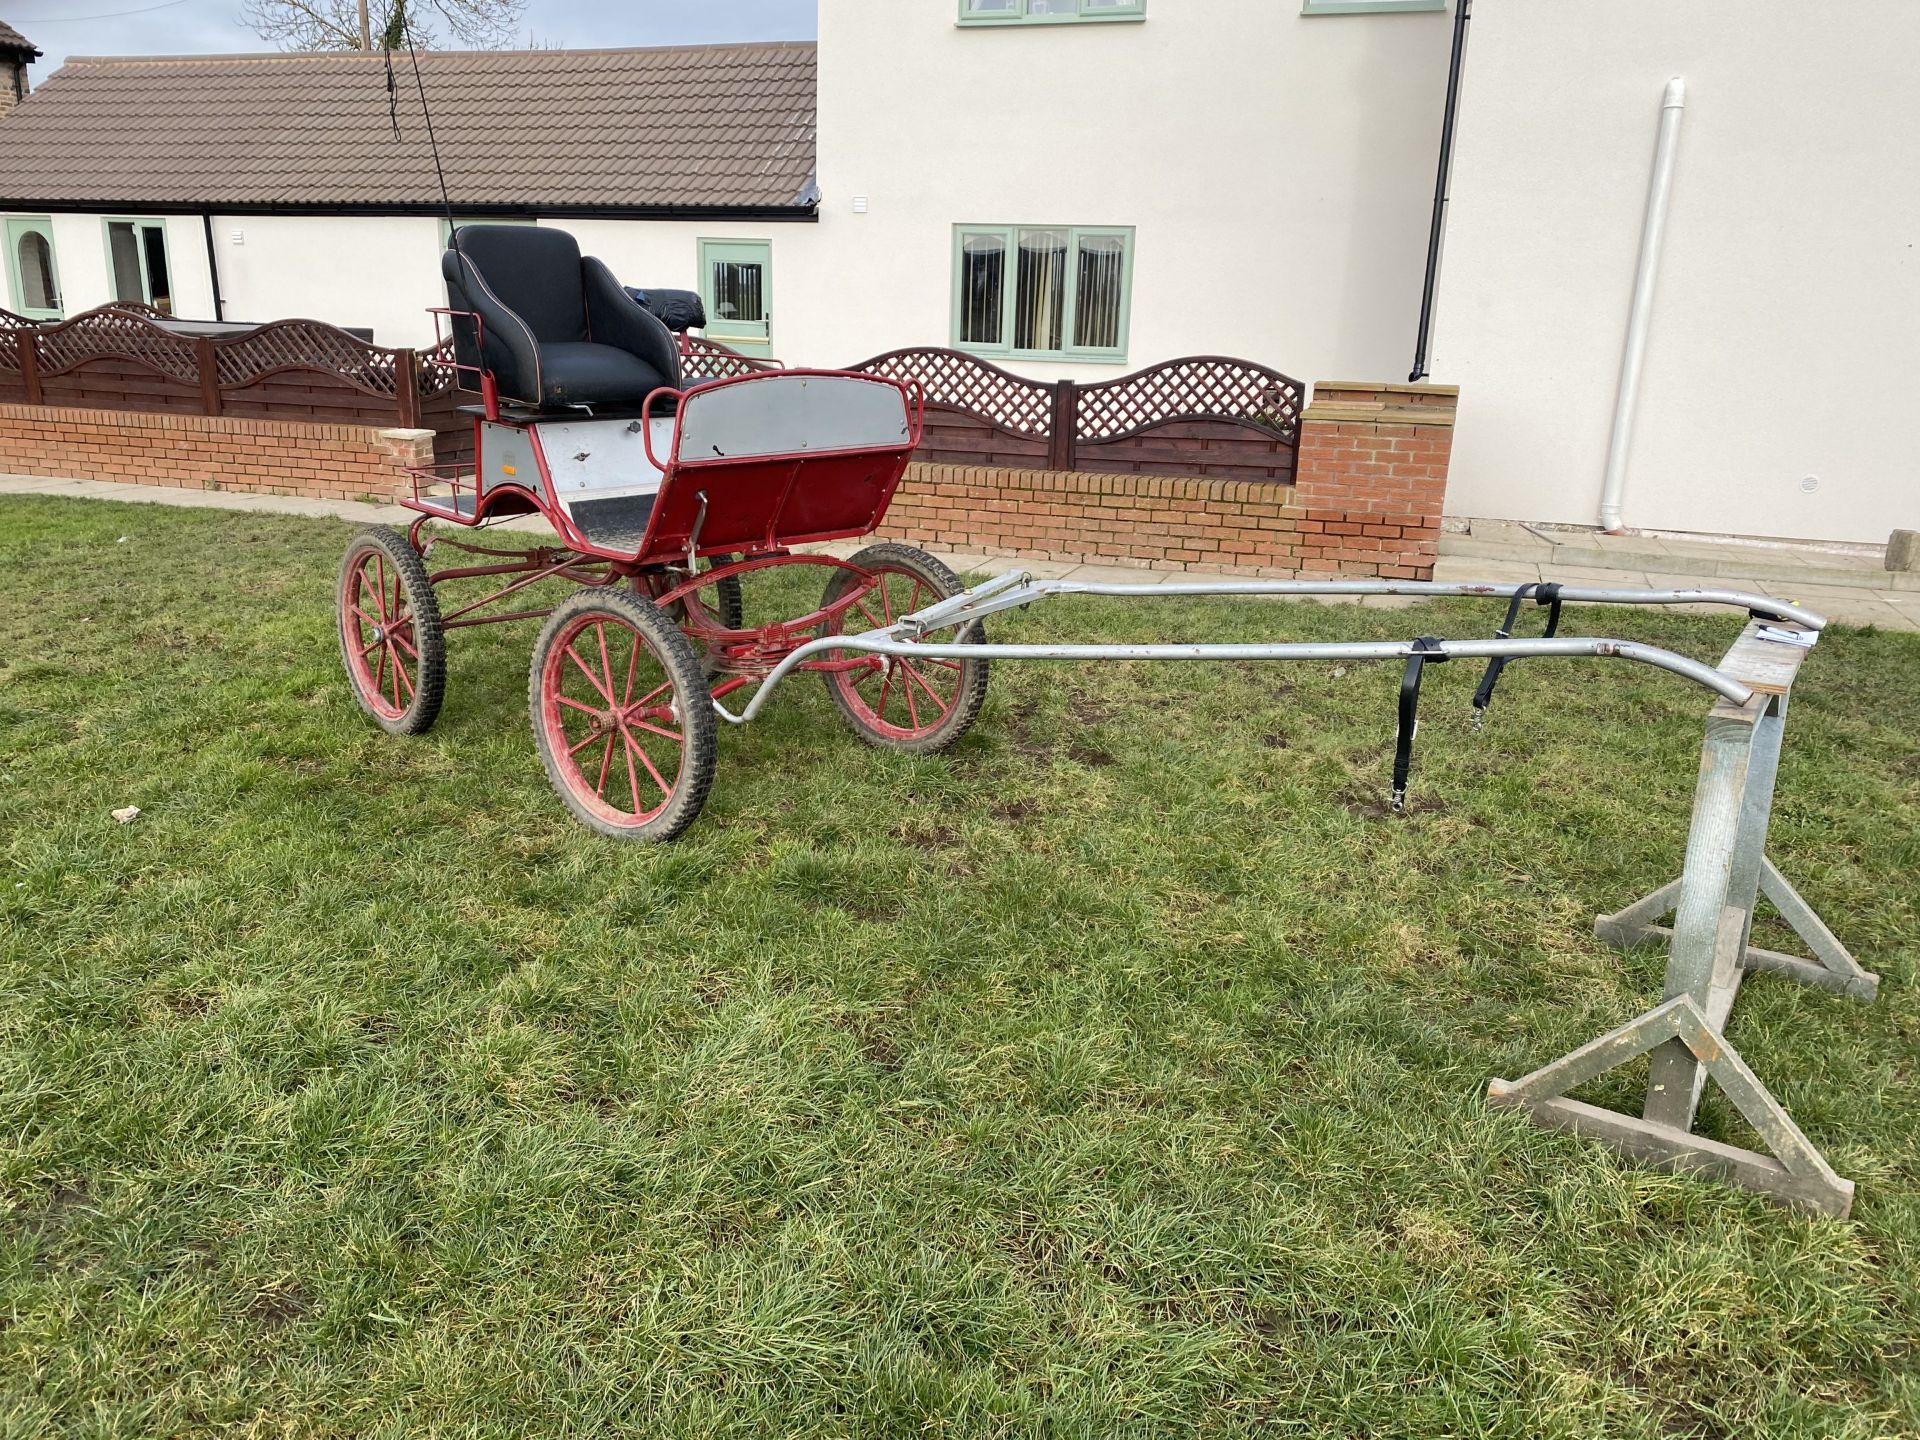 EXERCISE VEHICLE built by WBR Carriages of Dunmow to suit 13.2 to 15.2hh single. Finished in grey